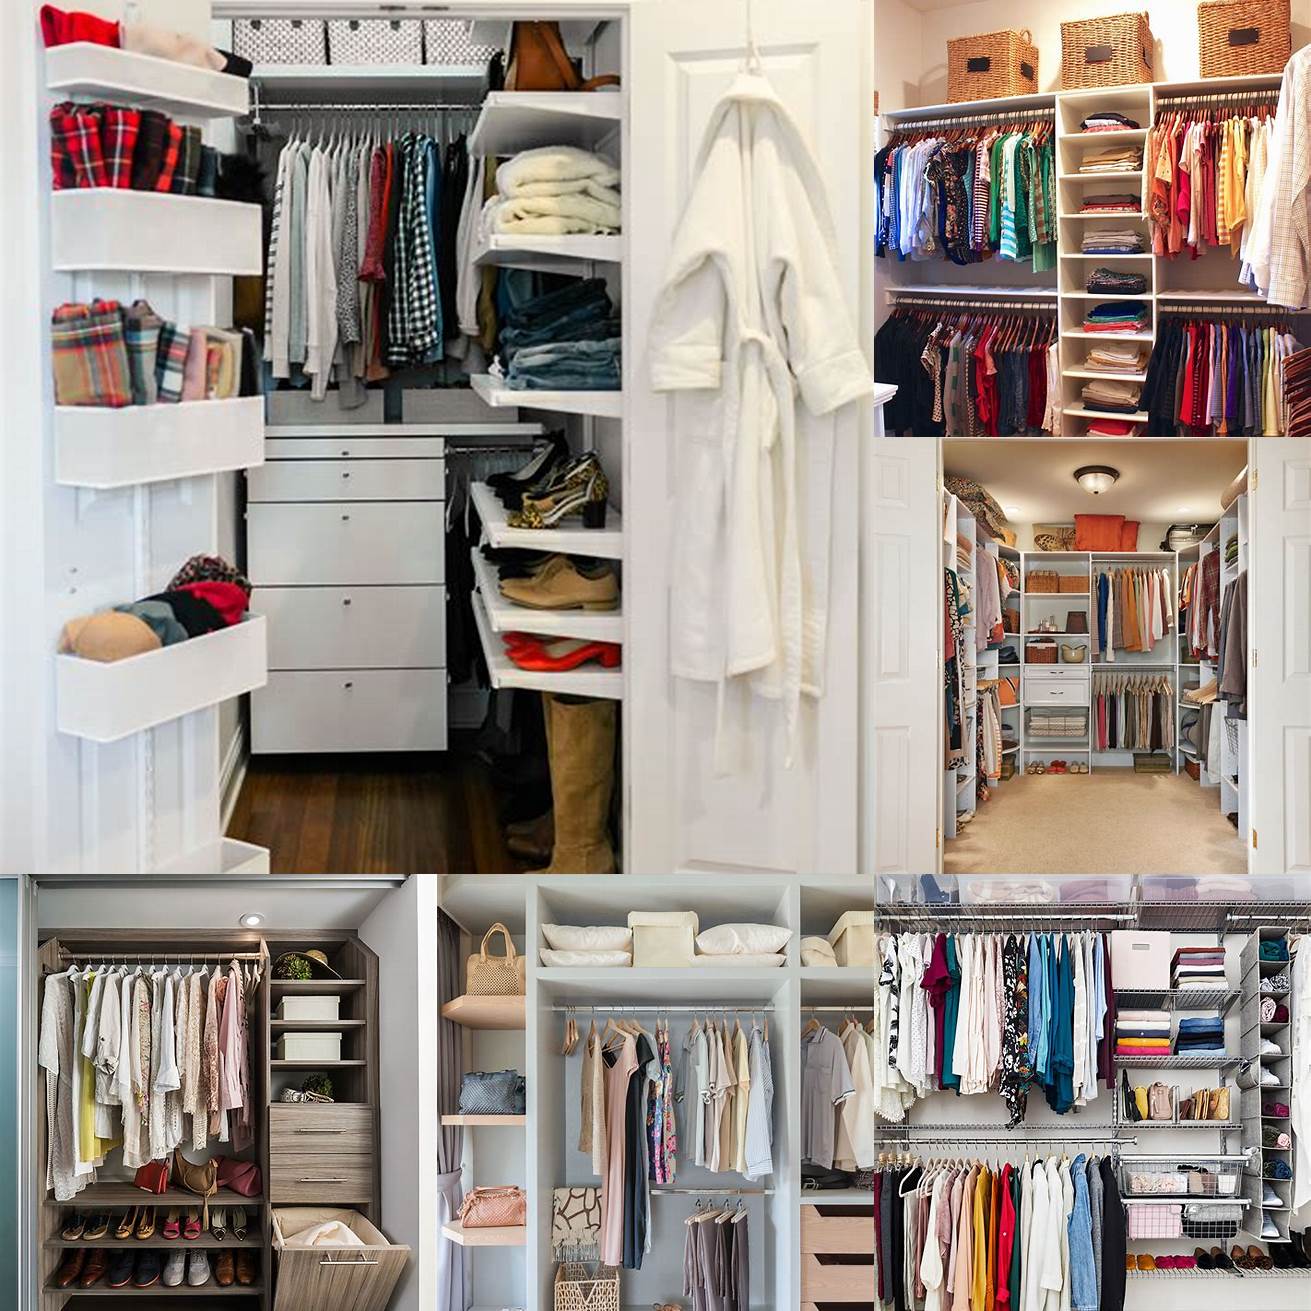 1 Increased storage space Closet furniture can help you maximize your storage space and keep your clothes and personal items organized